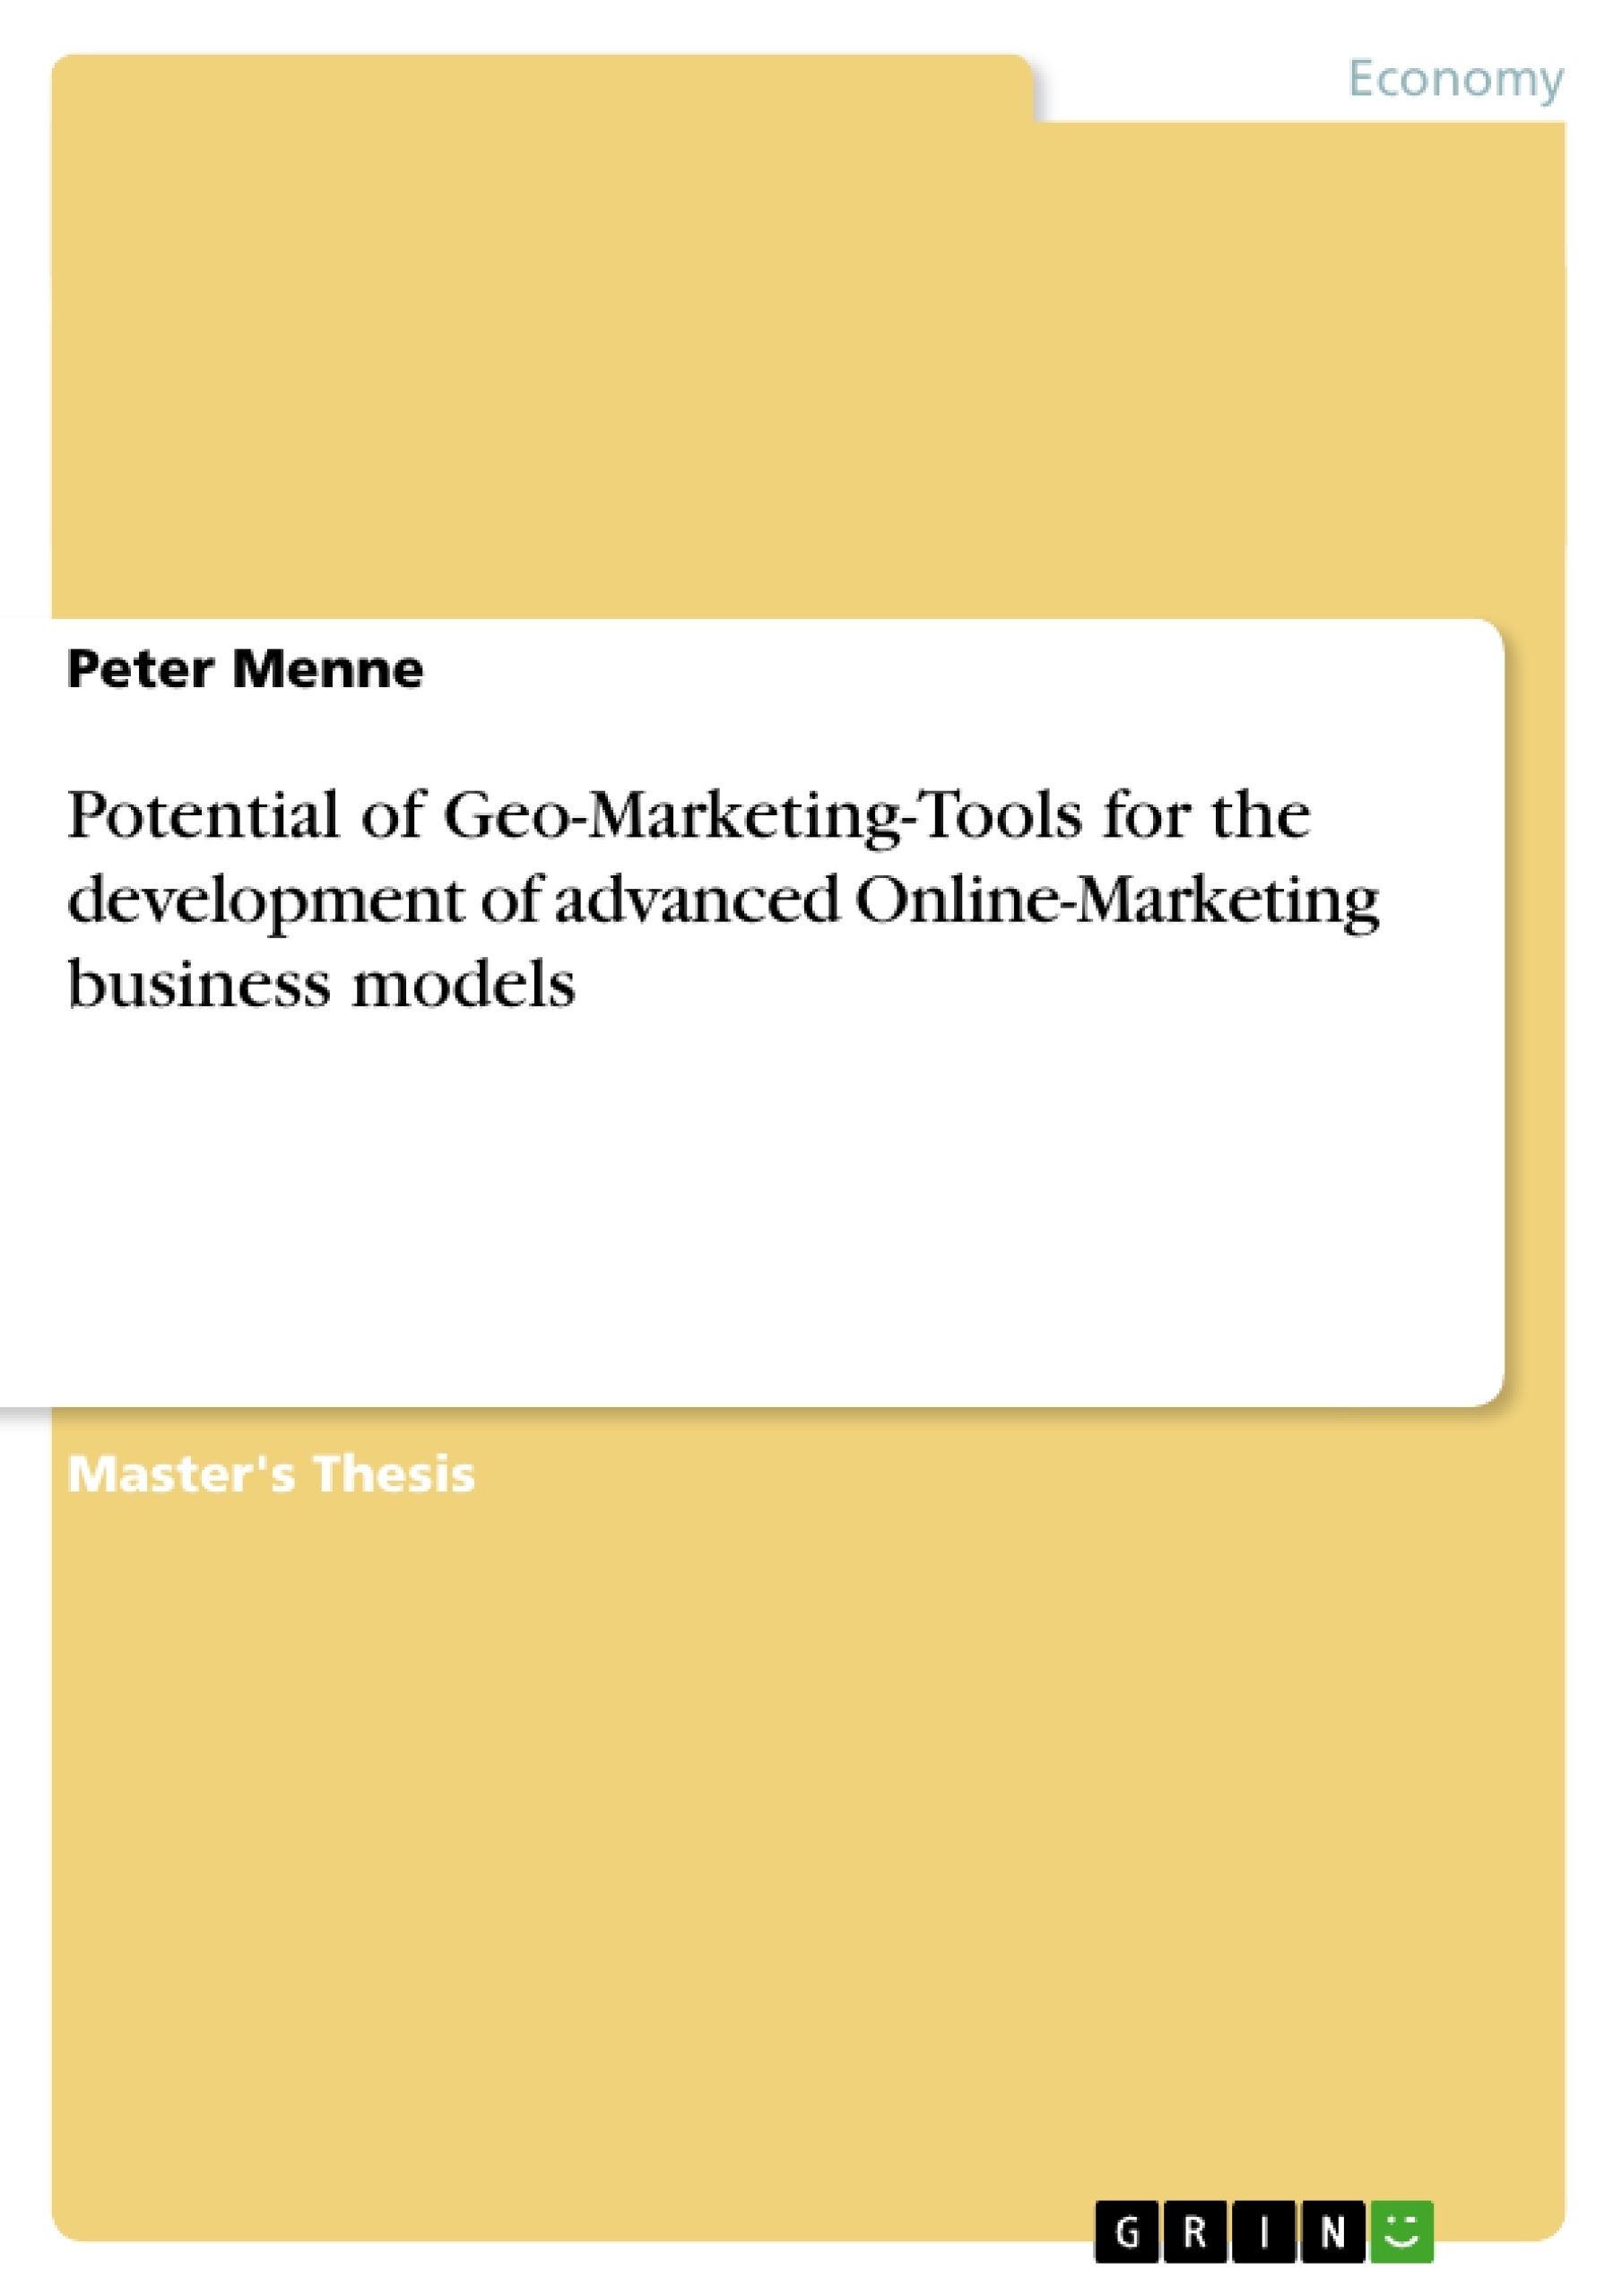 Titre: Potential of Geo-Marketing-Tools for the development of advanced Online-Marketing business models